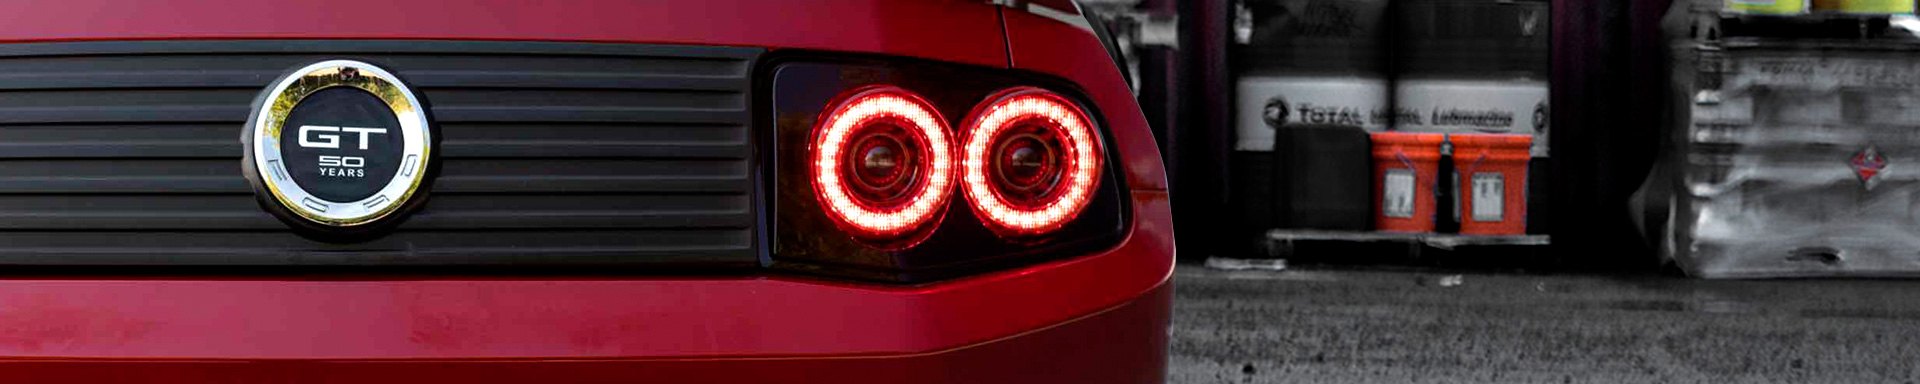 Upgrade the Tail Lights of Your Ford Mustang with New LED Units by Morimoto